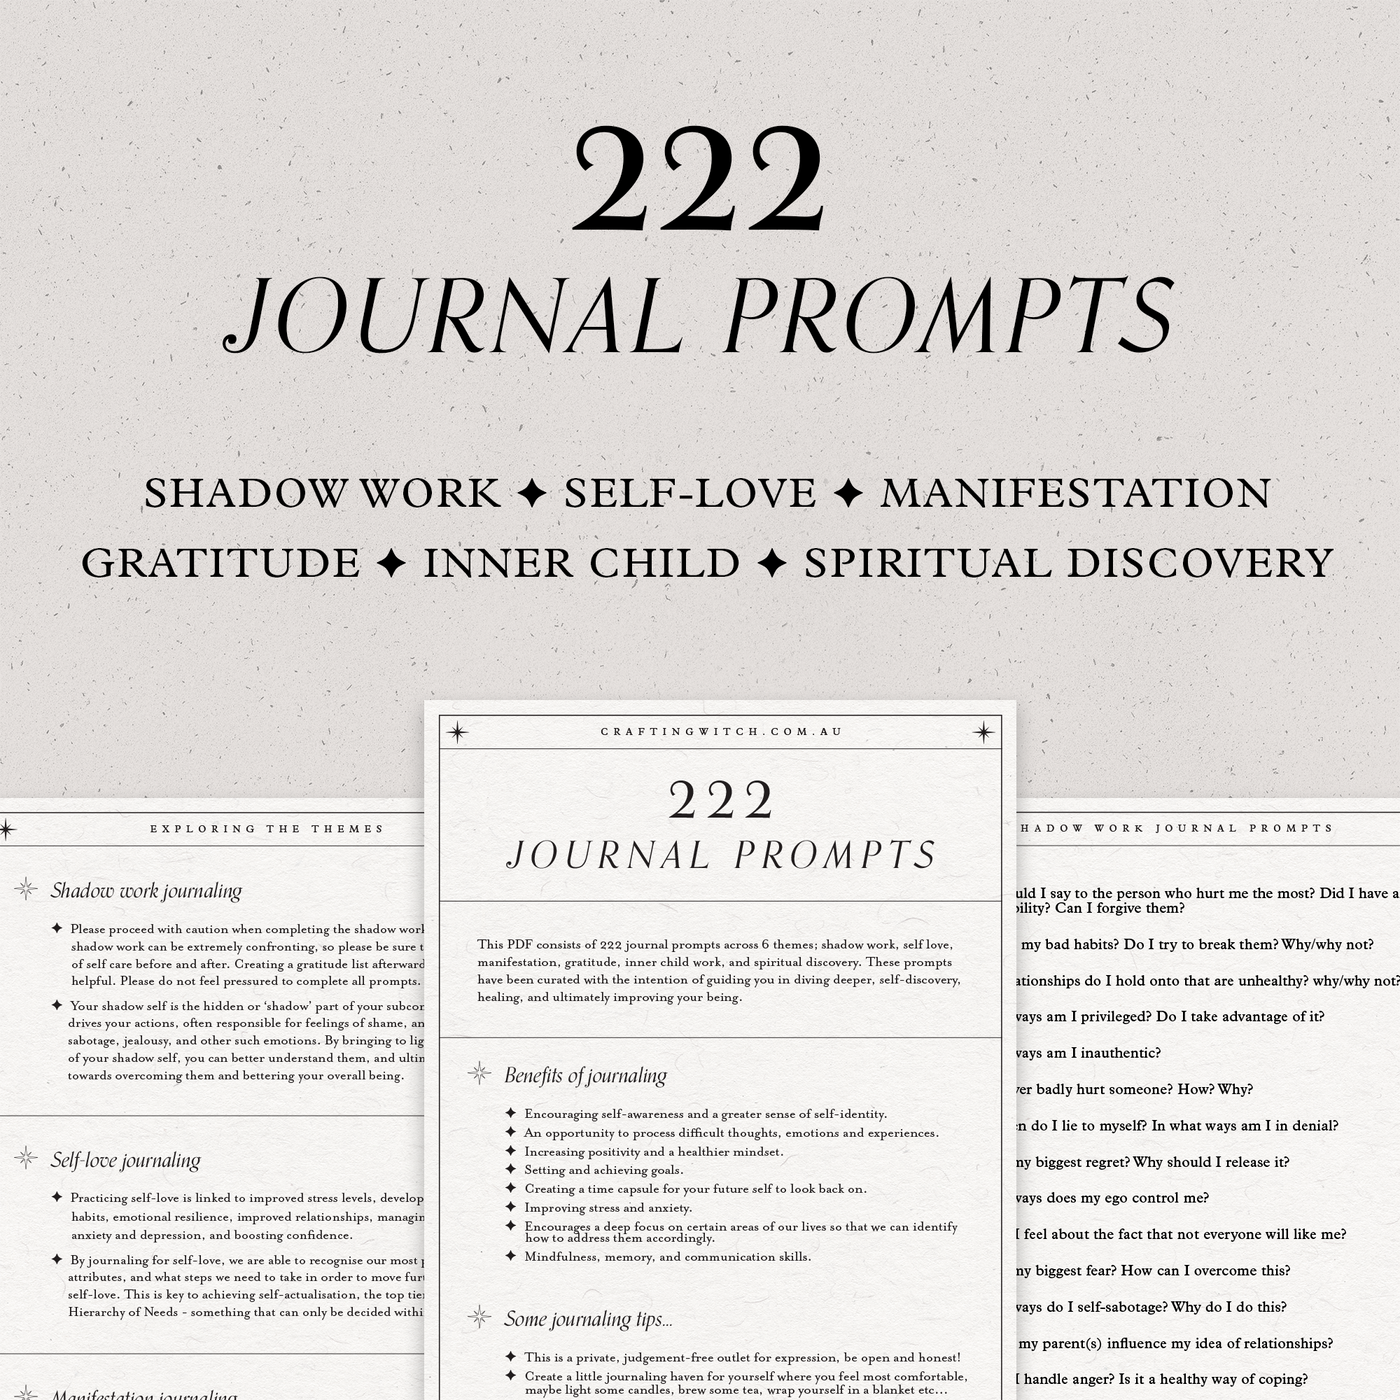 222 Journal Prompts